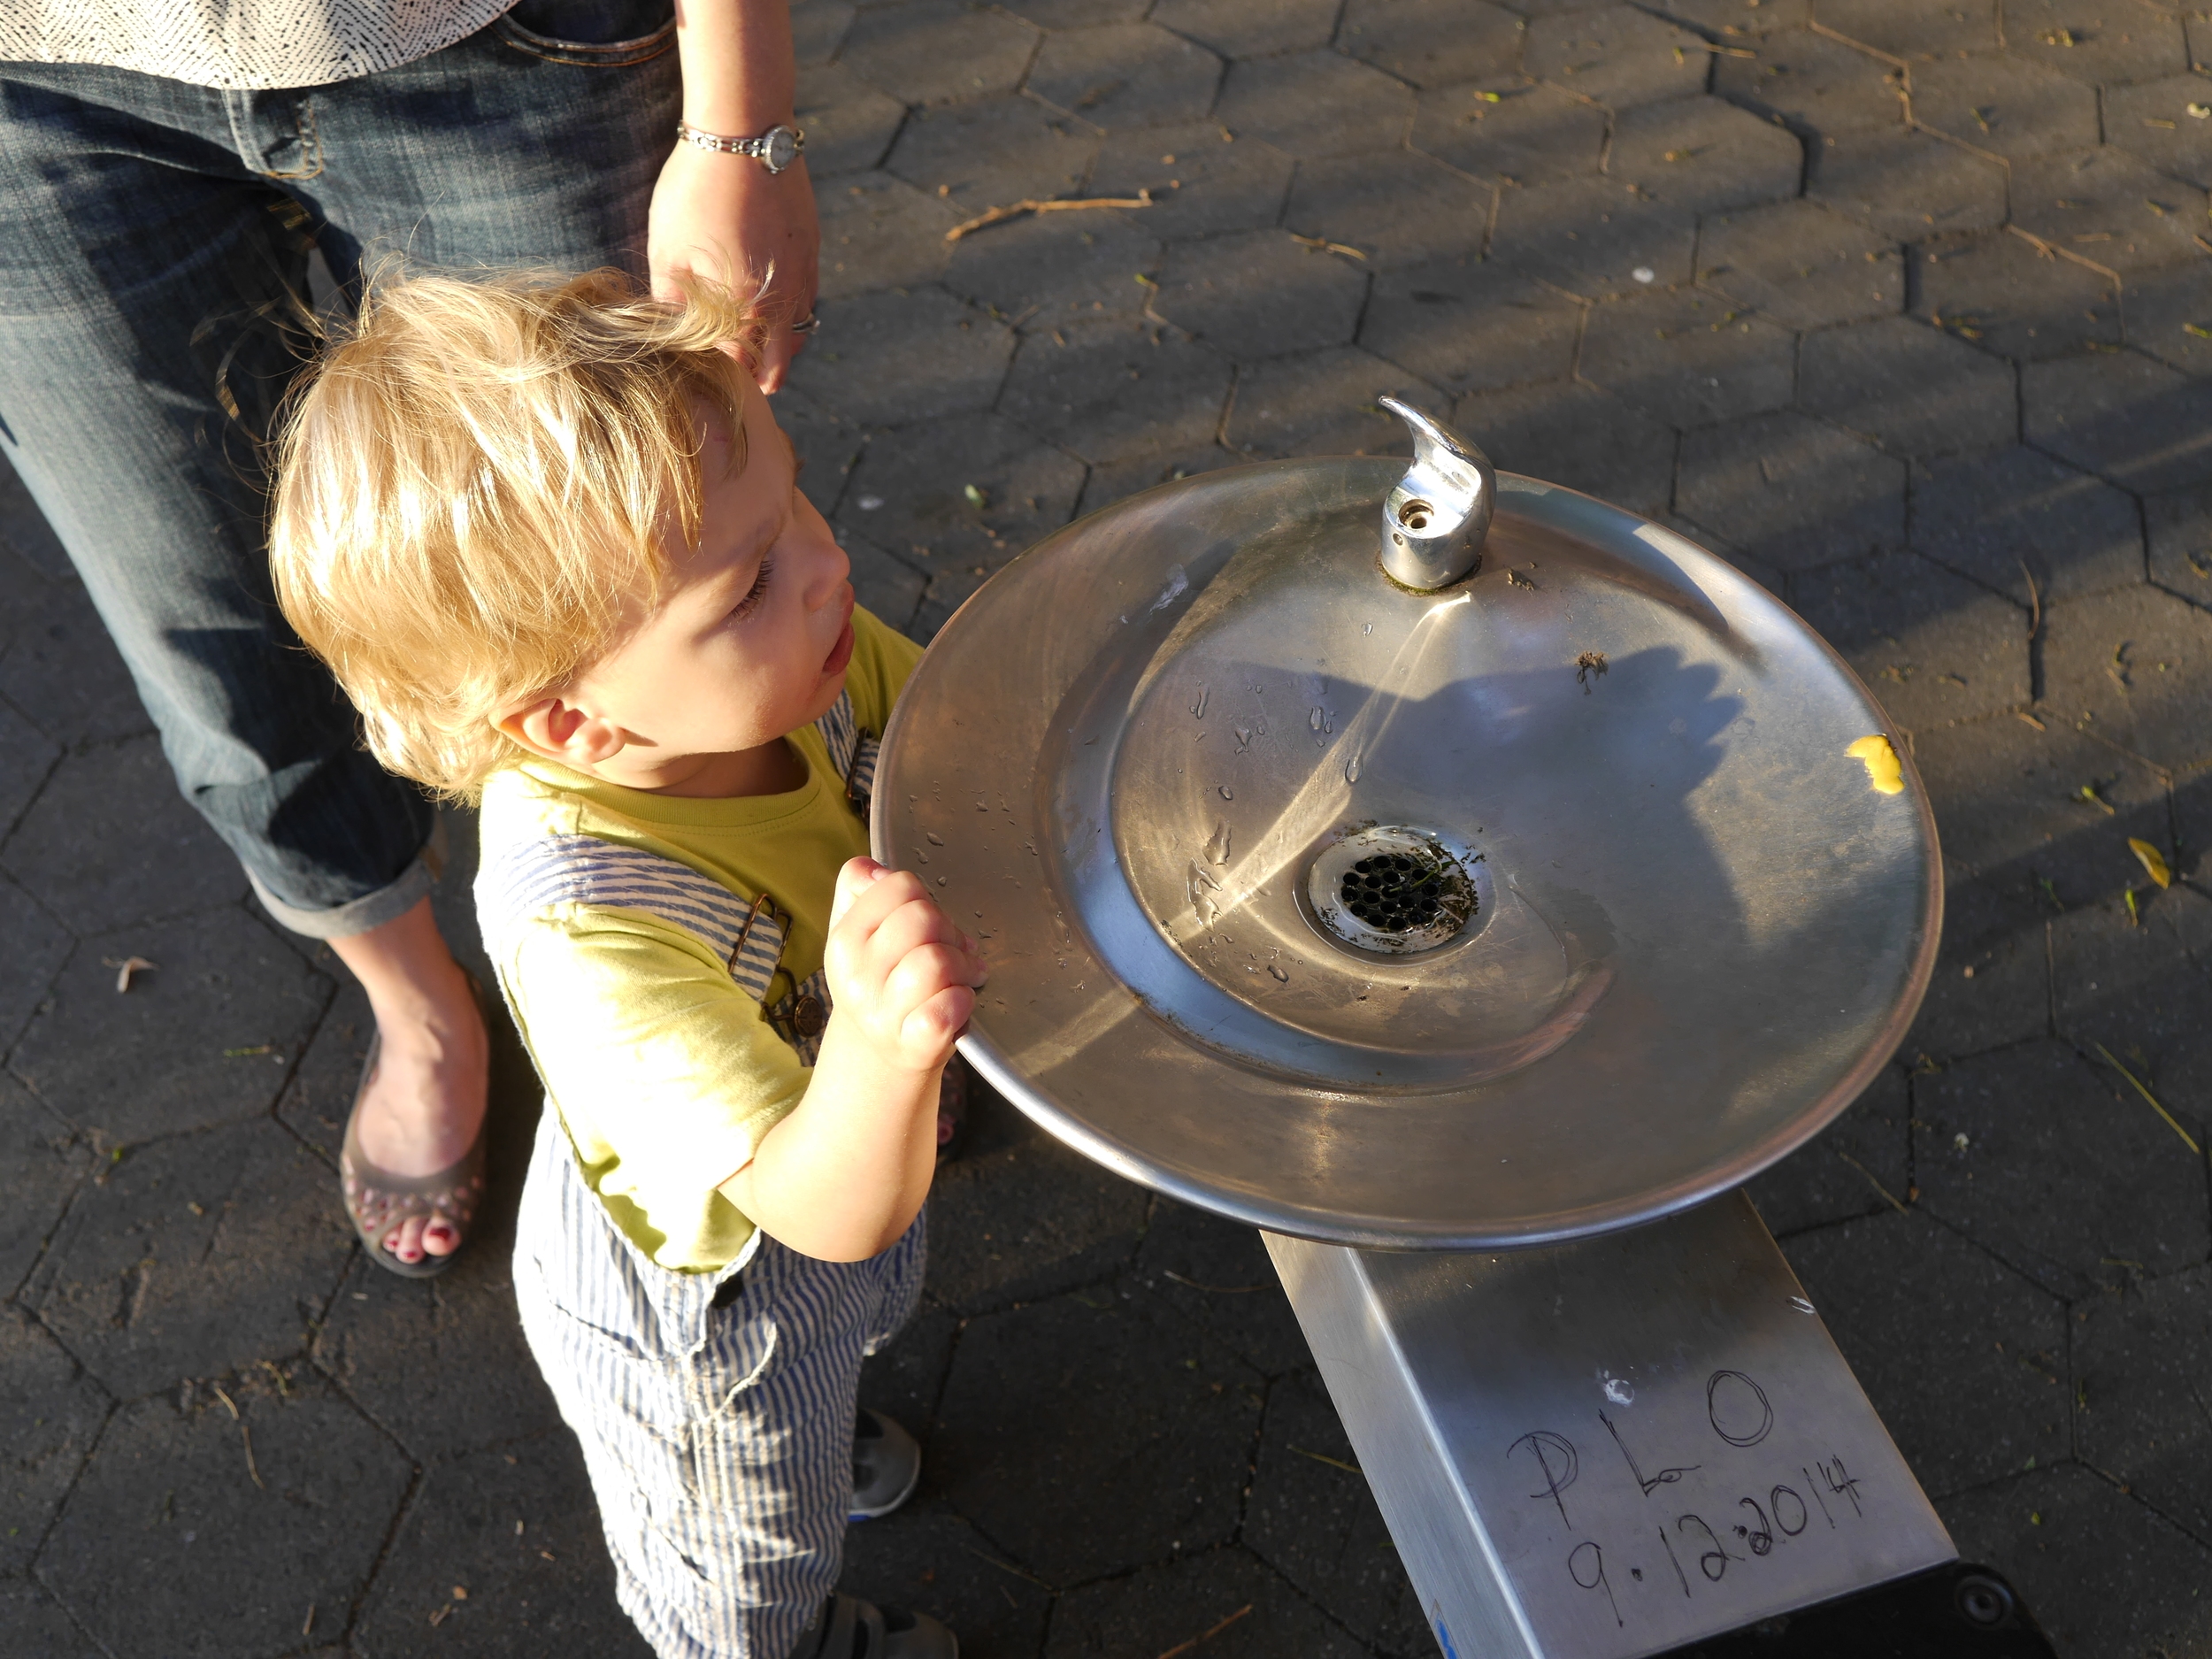  Water fountains are tricky when you're short. 